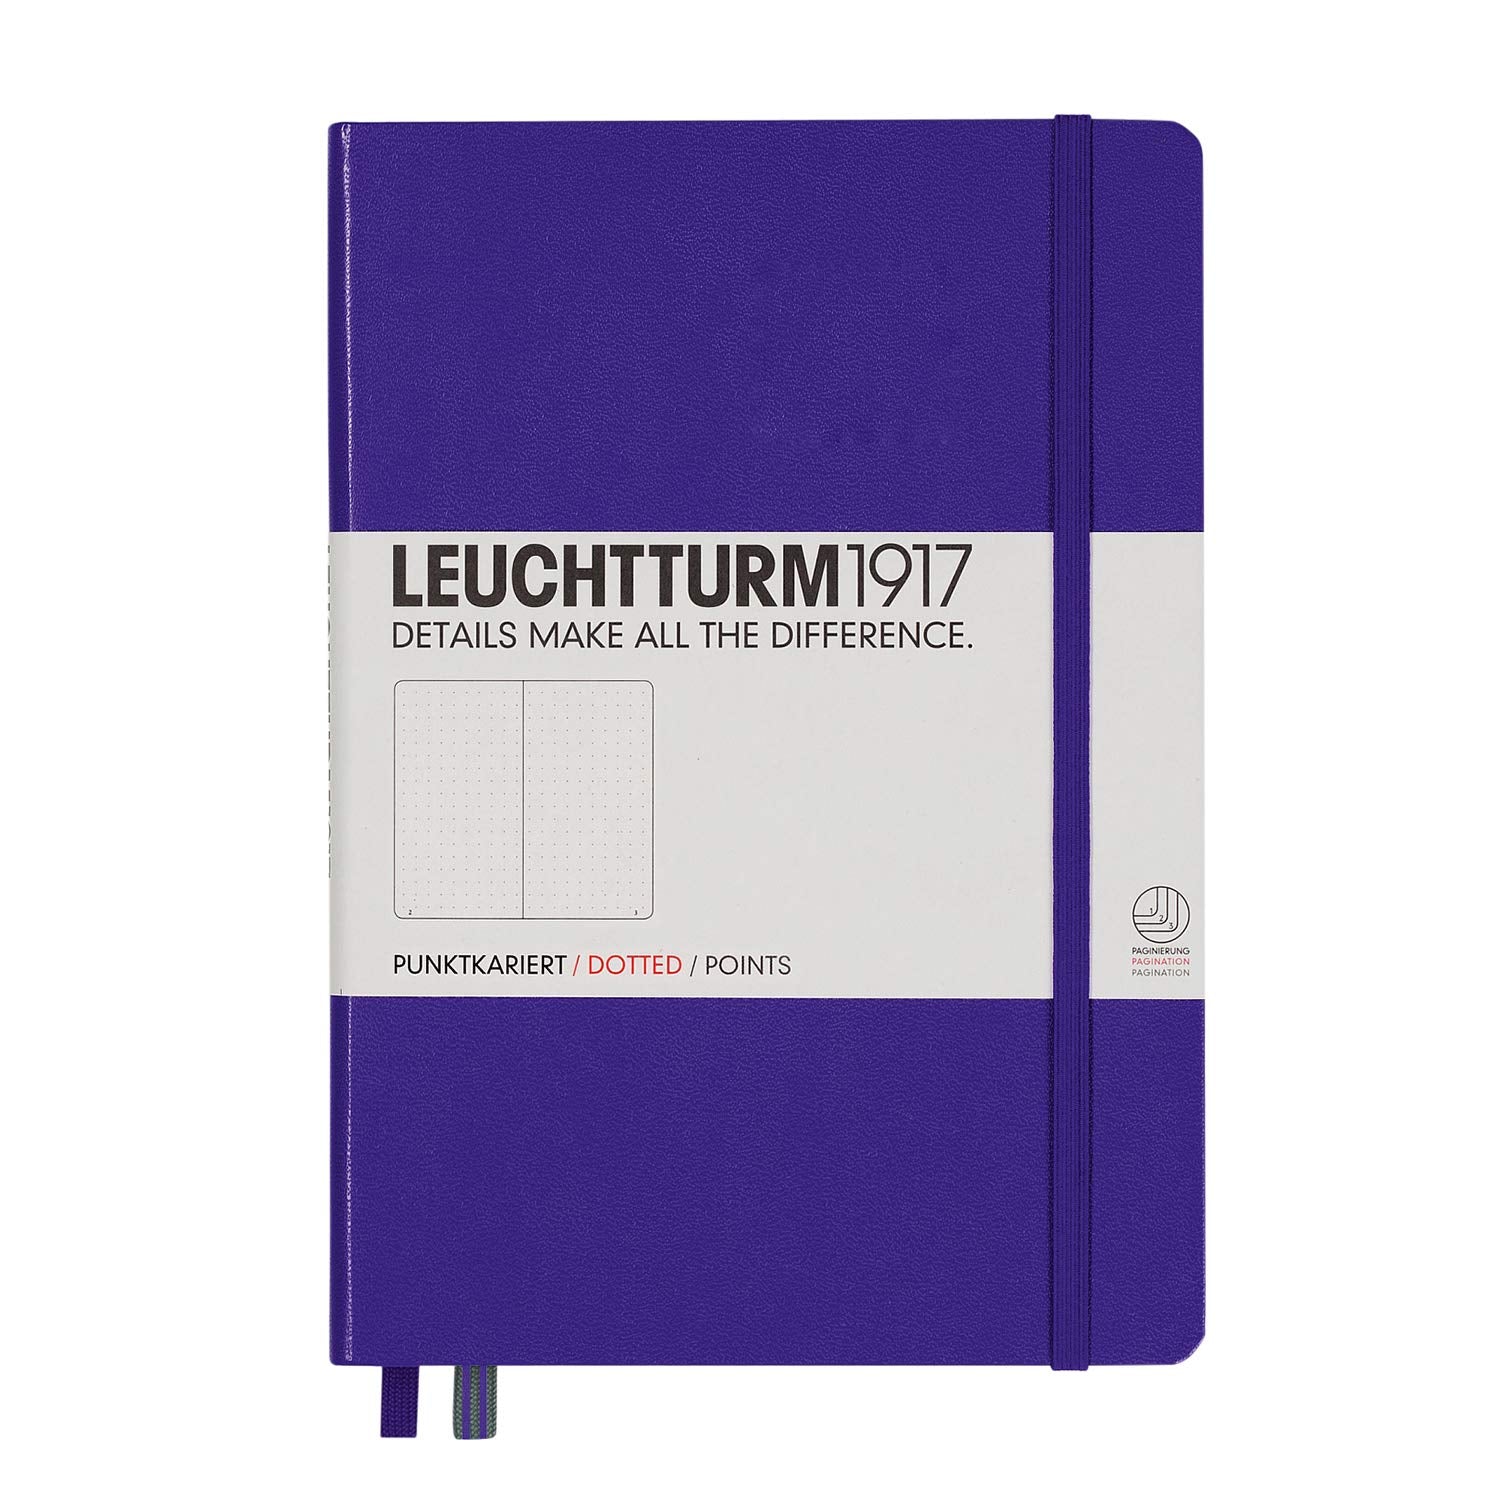 Leuchtturm1917 Medium A5 Dotted Hardcover Notebook (Purple) - 249 Numbered Pages